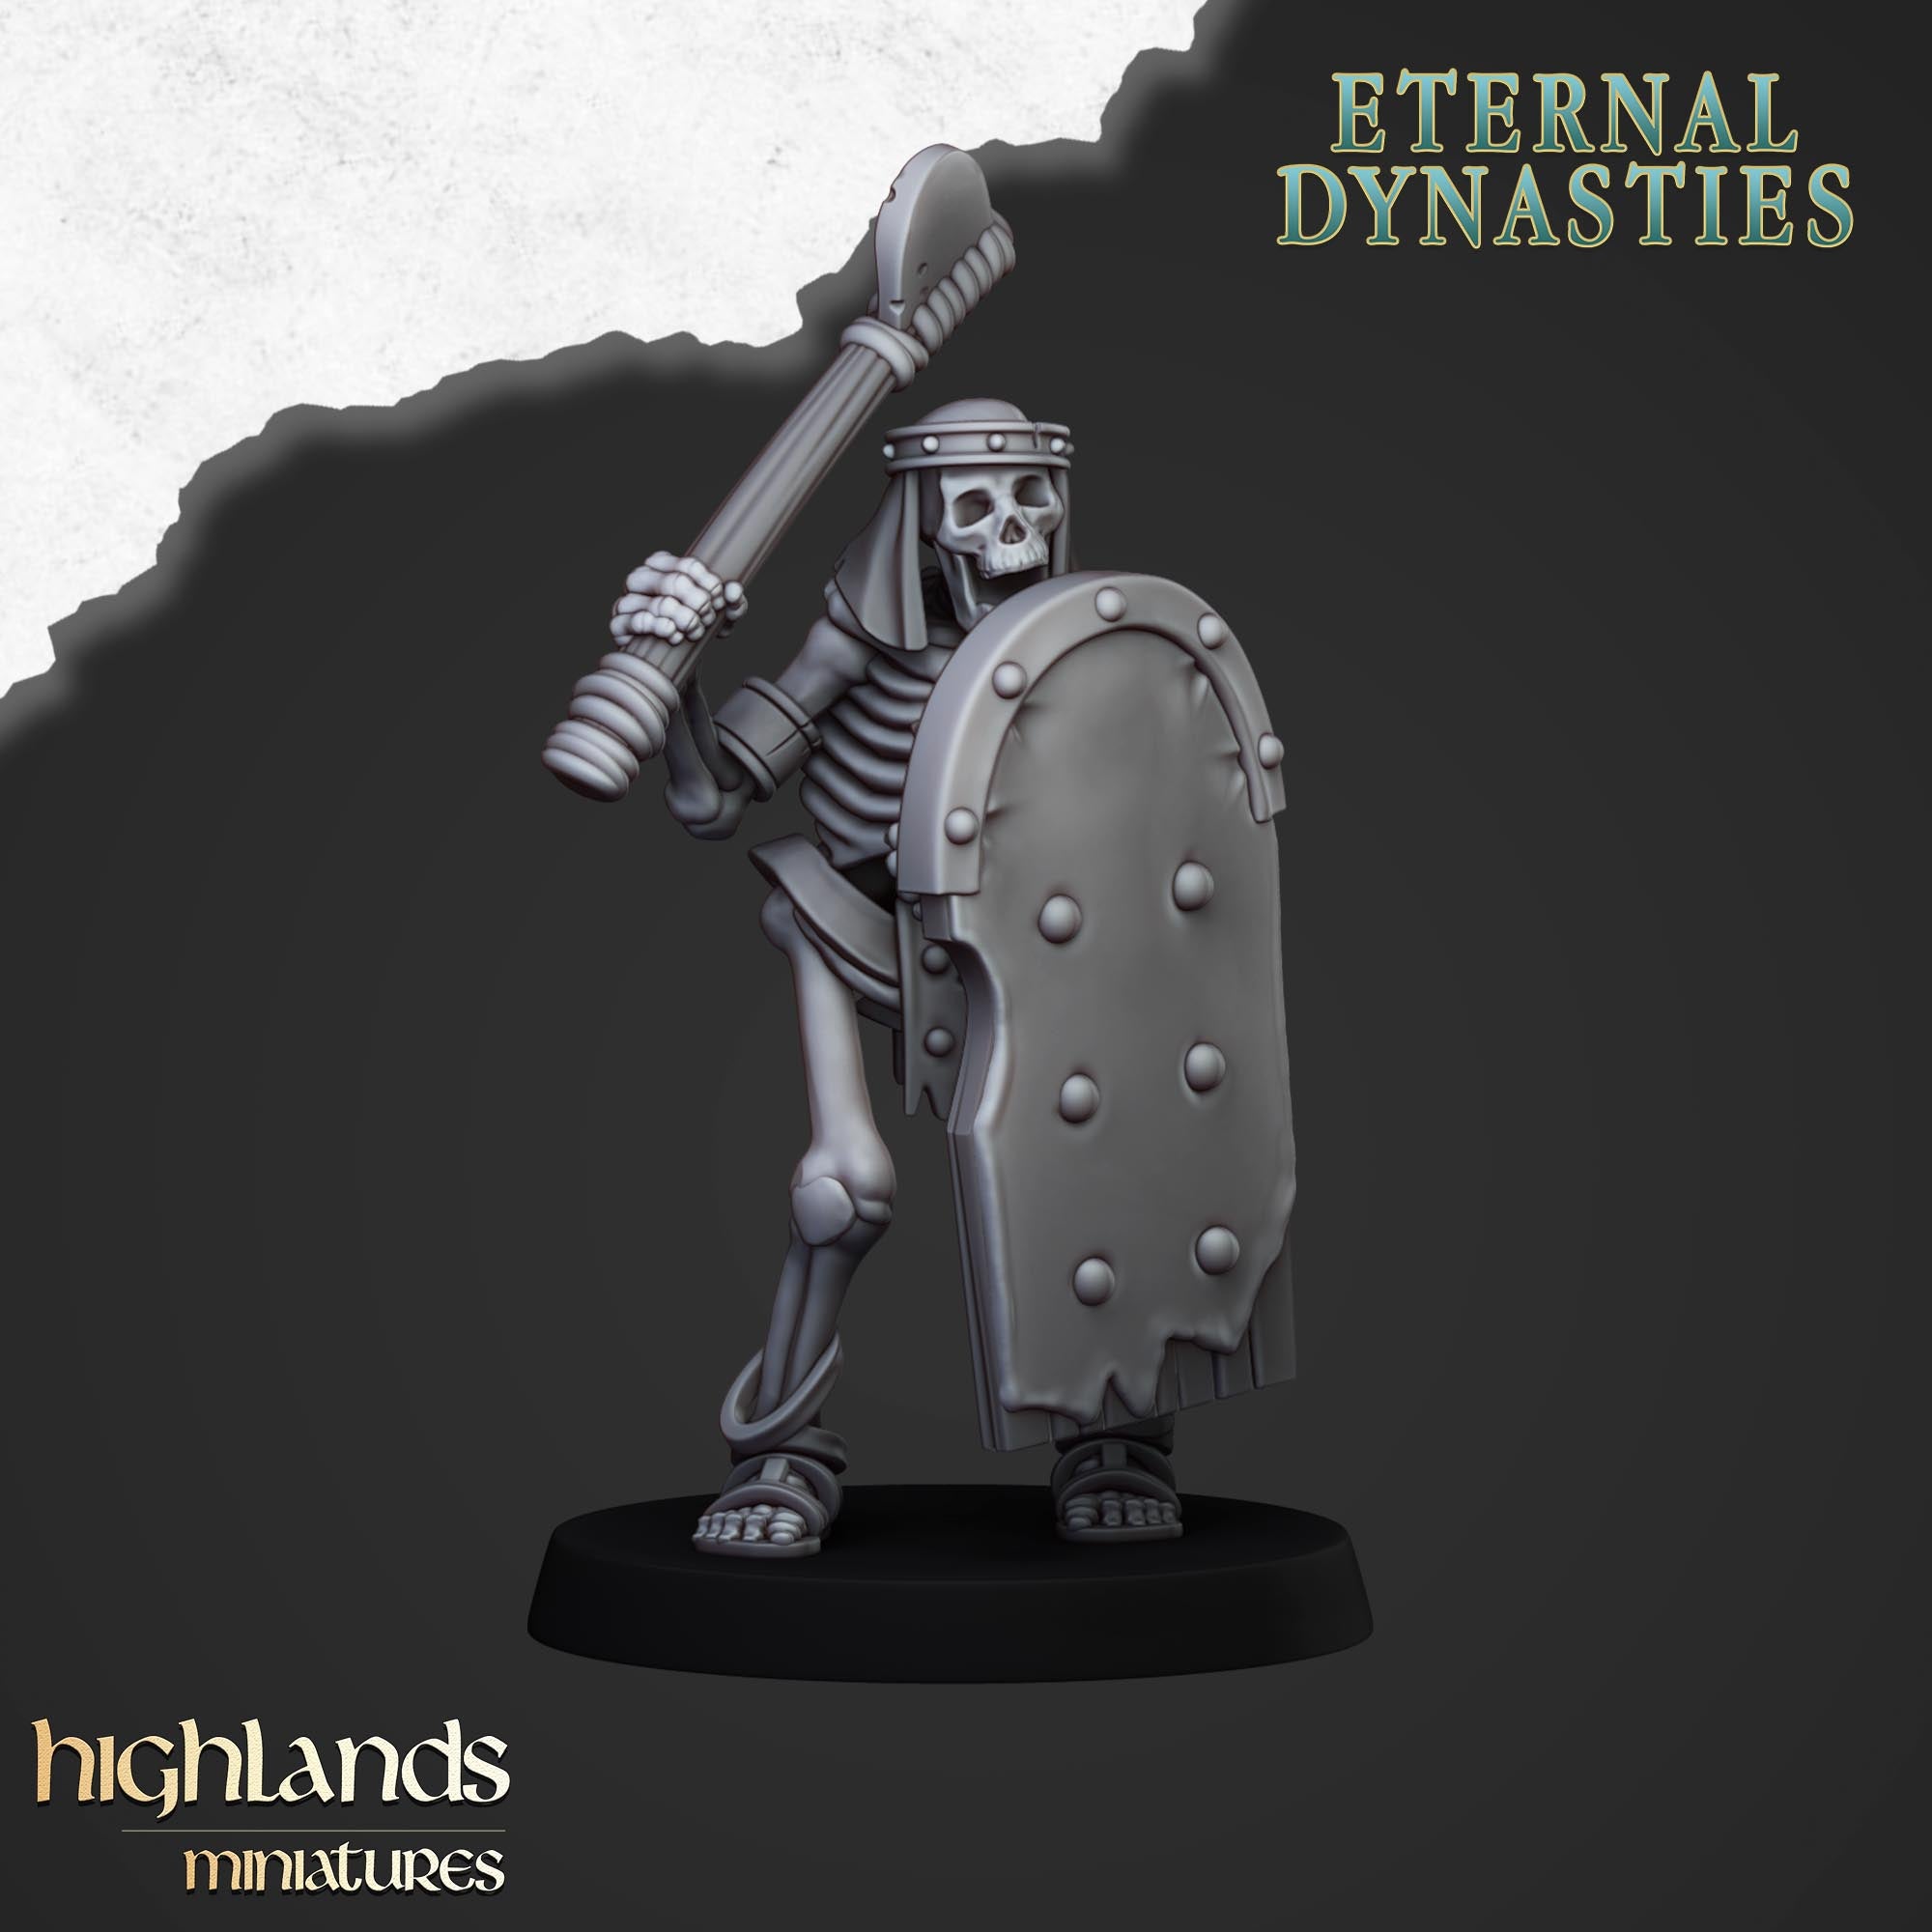 Ancient Skeletons with Hand Weapons (x15) - Eternal Dynasties - | Highlands Miniatures